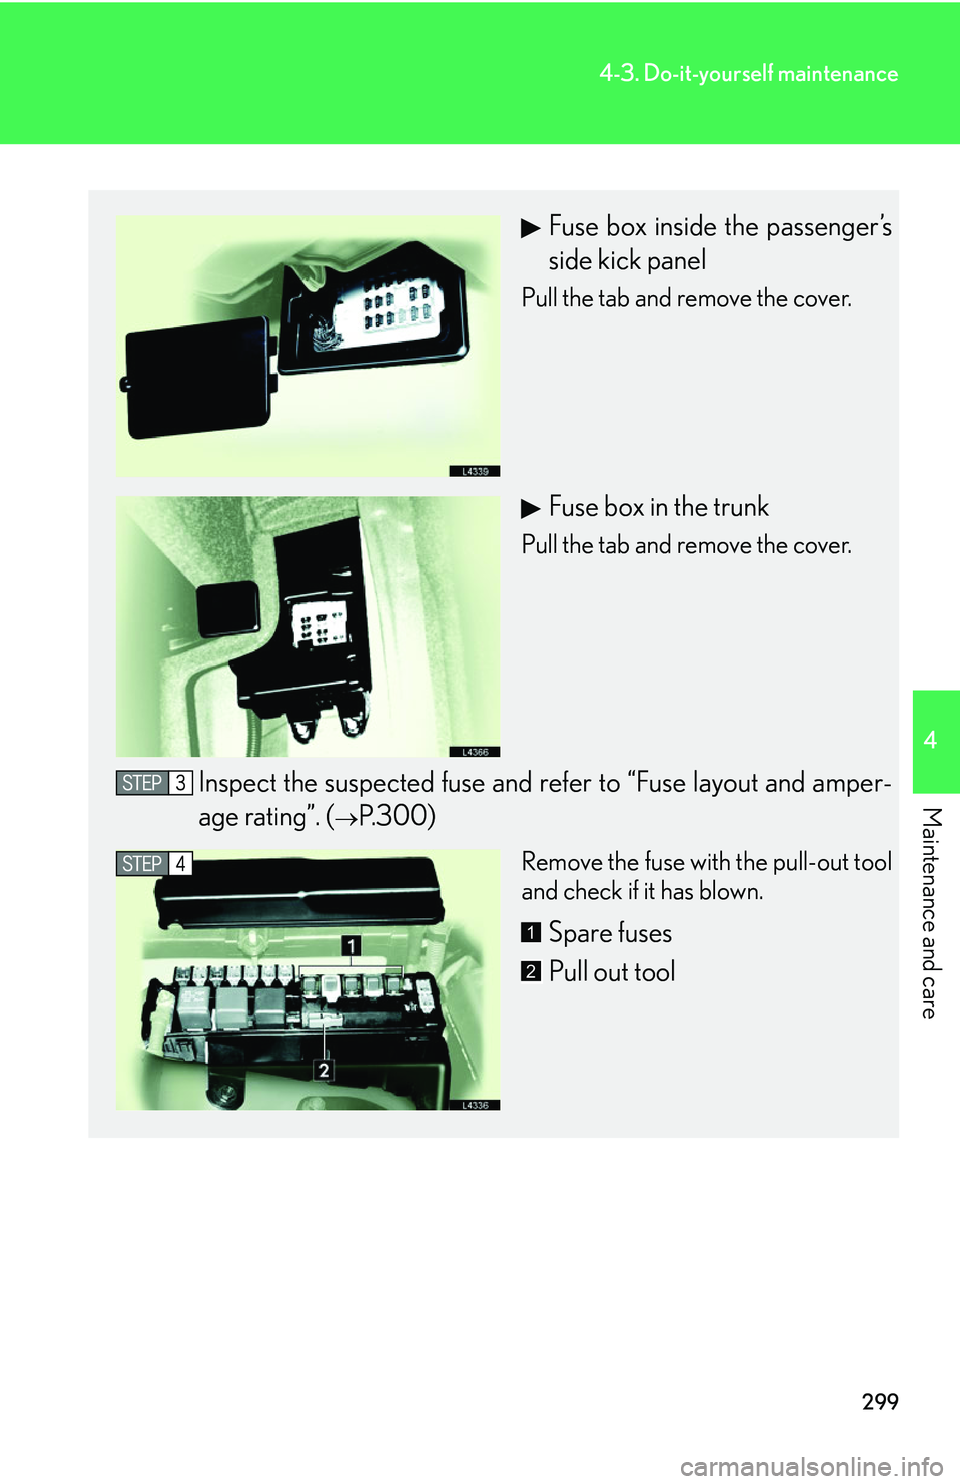 LEXUS LS430 2006  Owners Manual 299
4-3. Do-it-yourself maintenance
4
Maintenance and care
Fuse box inside the passenger’s 
side kick panel
Pull the tab and remove the cover.
Fuse box in the trunk
Pull the tab and remove the cover